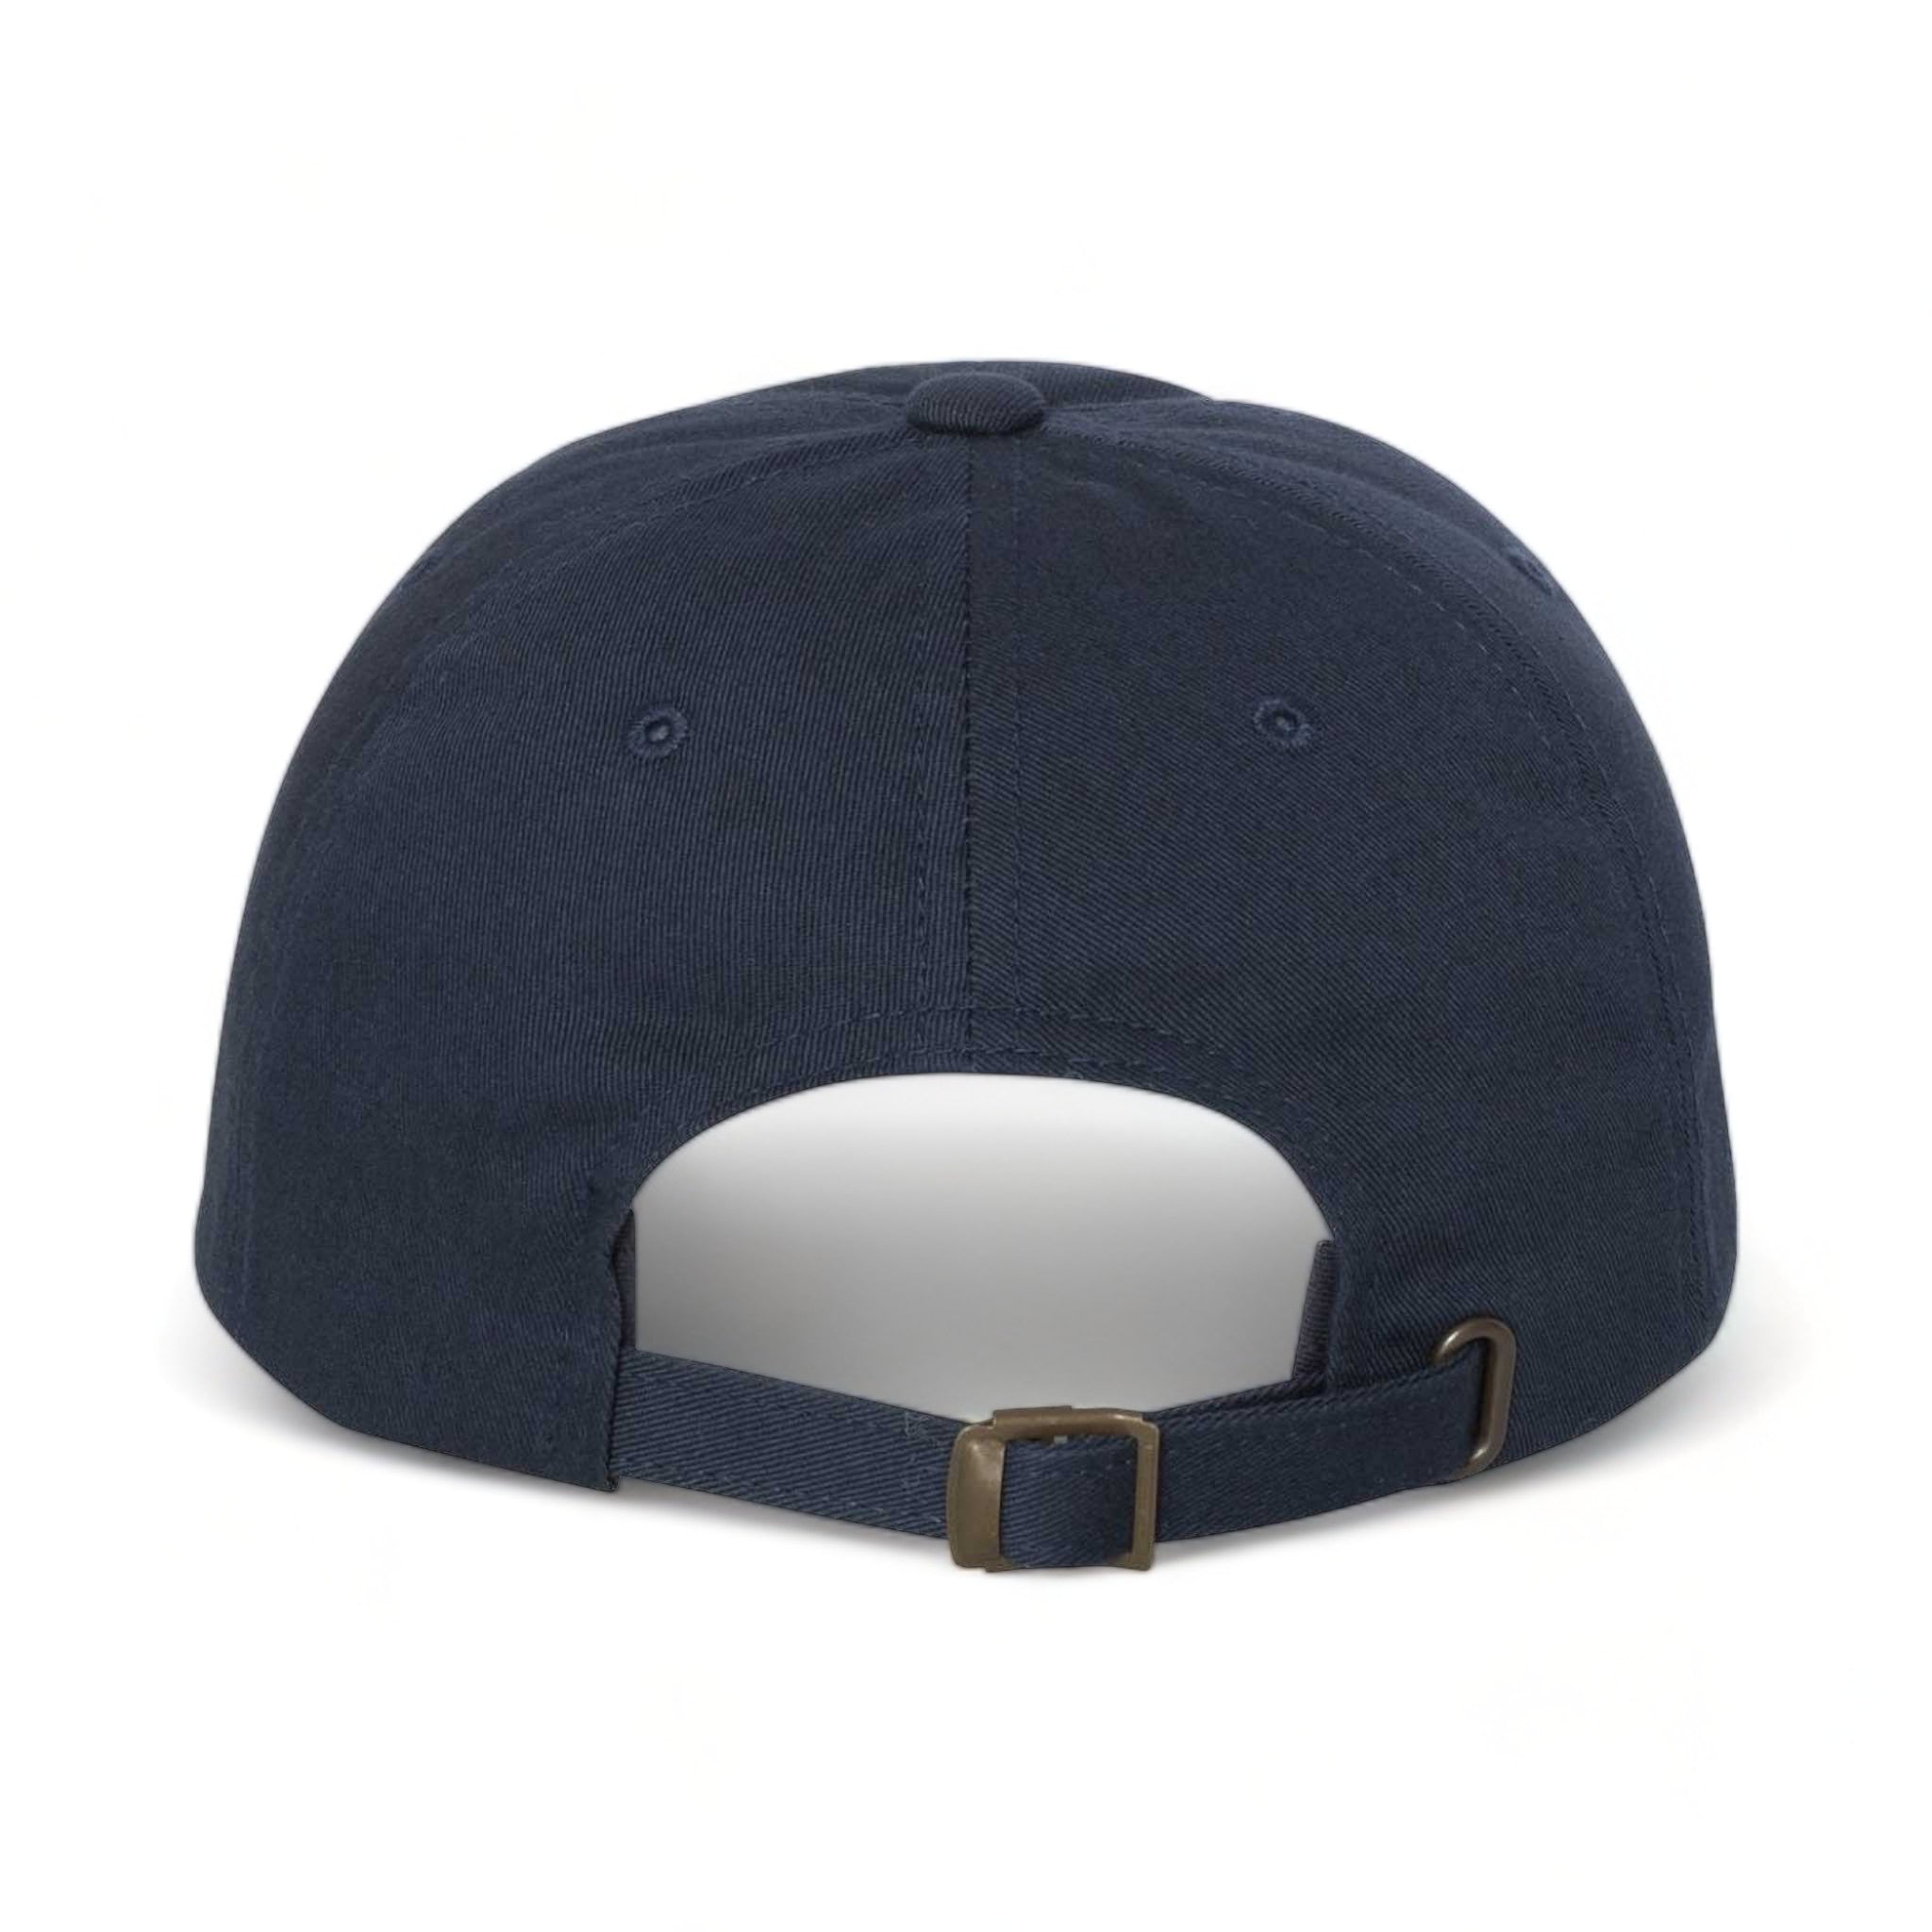 Back view of YP Classics 6245CM custom hat in navy